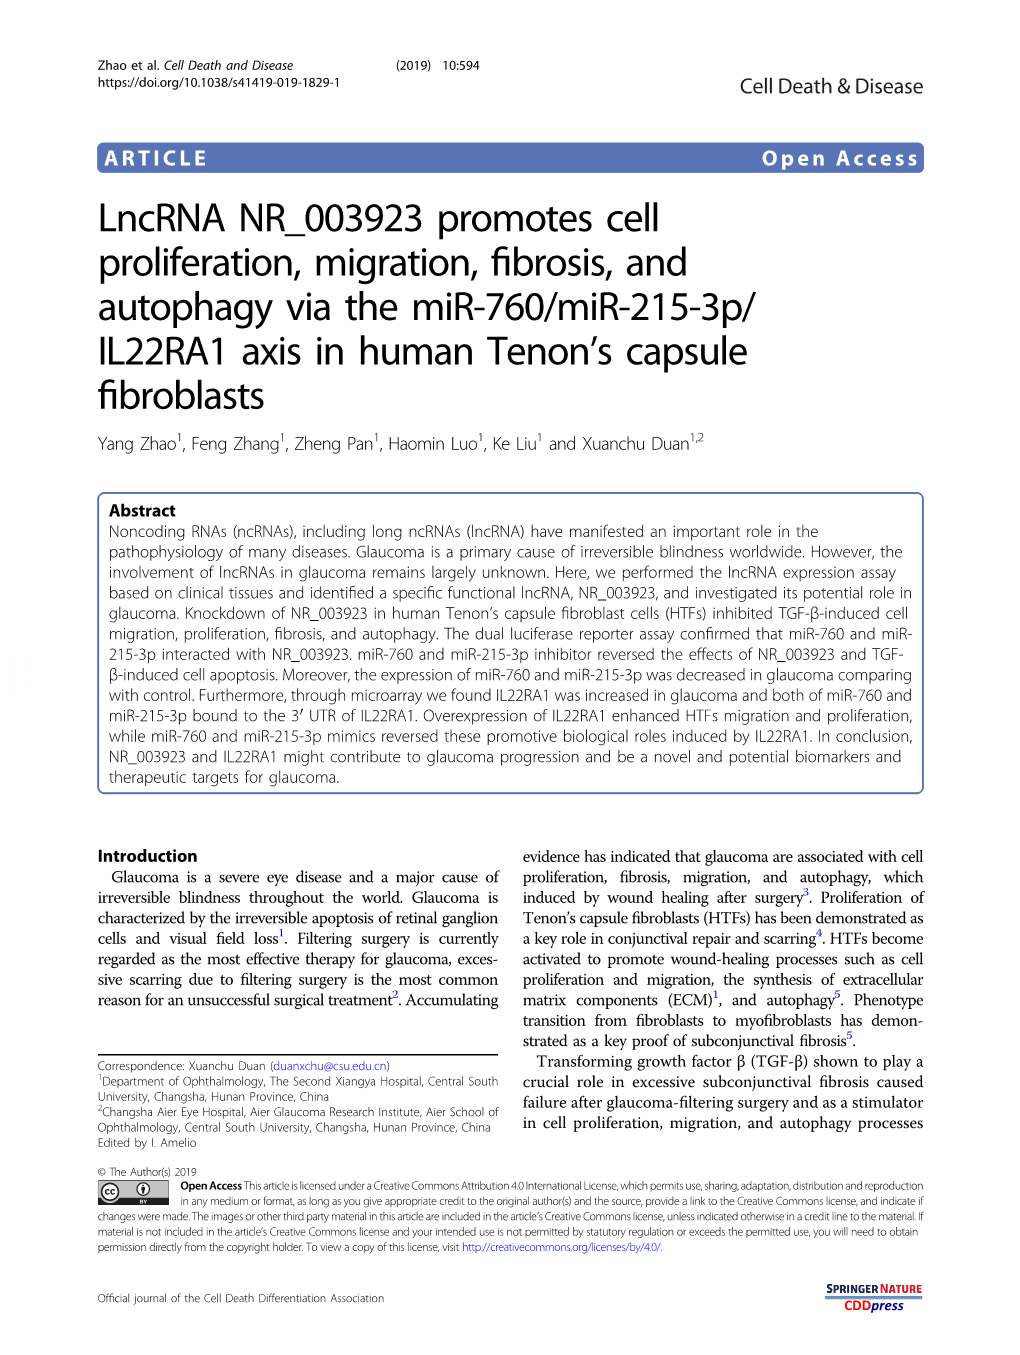 Lncrna NR 003923 Promotes Cell Proliferation, Migration, Fibrosis, And